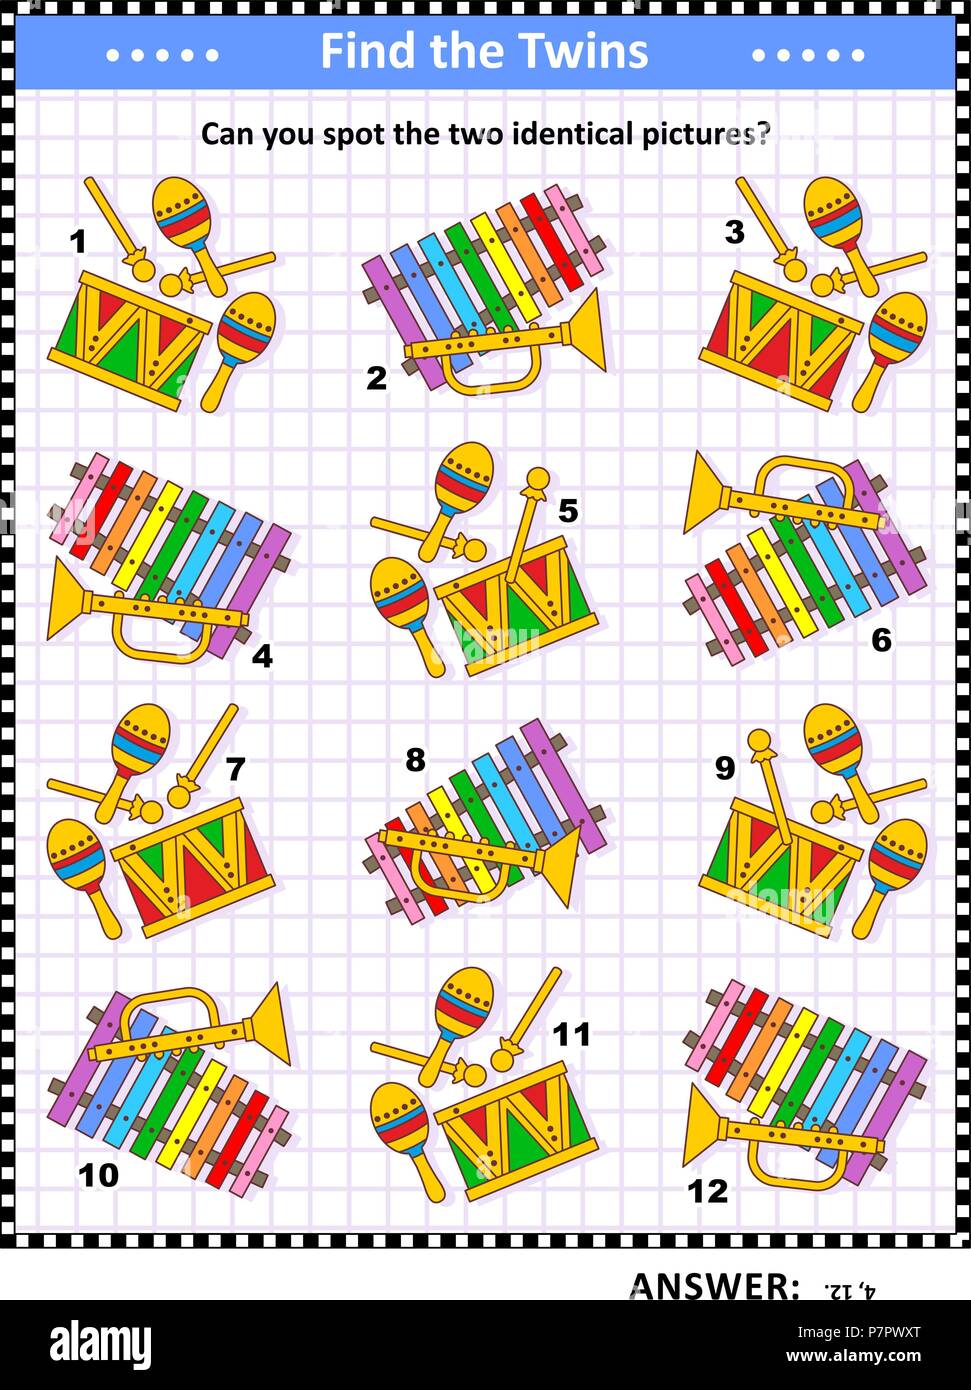 Visual puzzle with toy musical instruments: Can you spot the two identical pictures? Answer included. Stock Vector